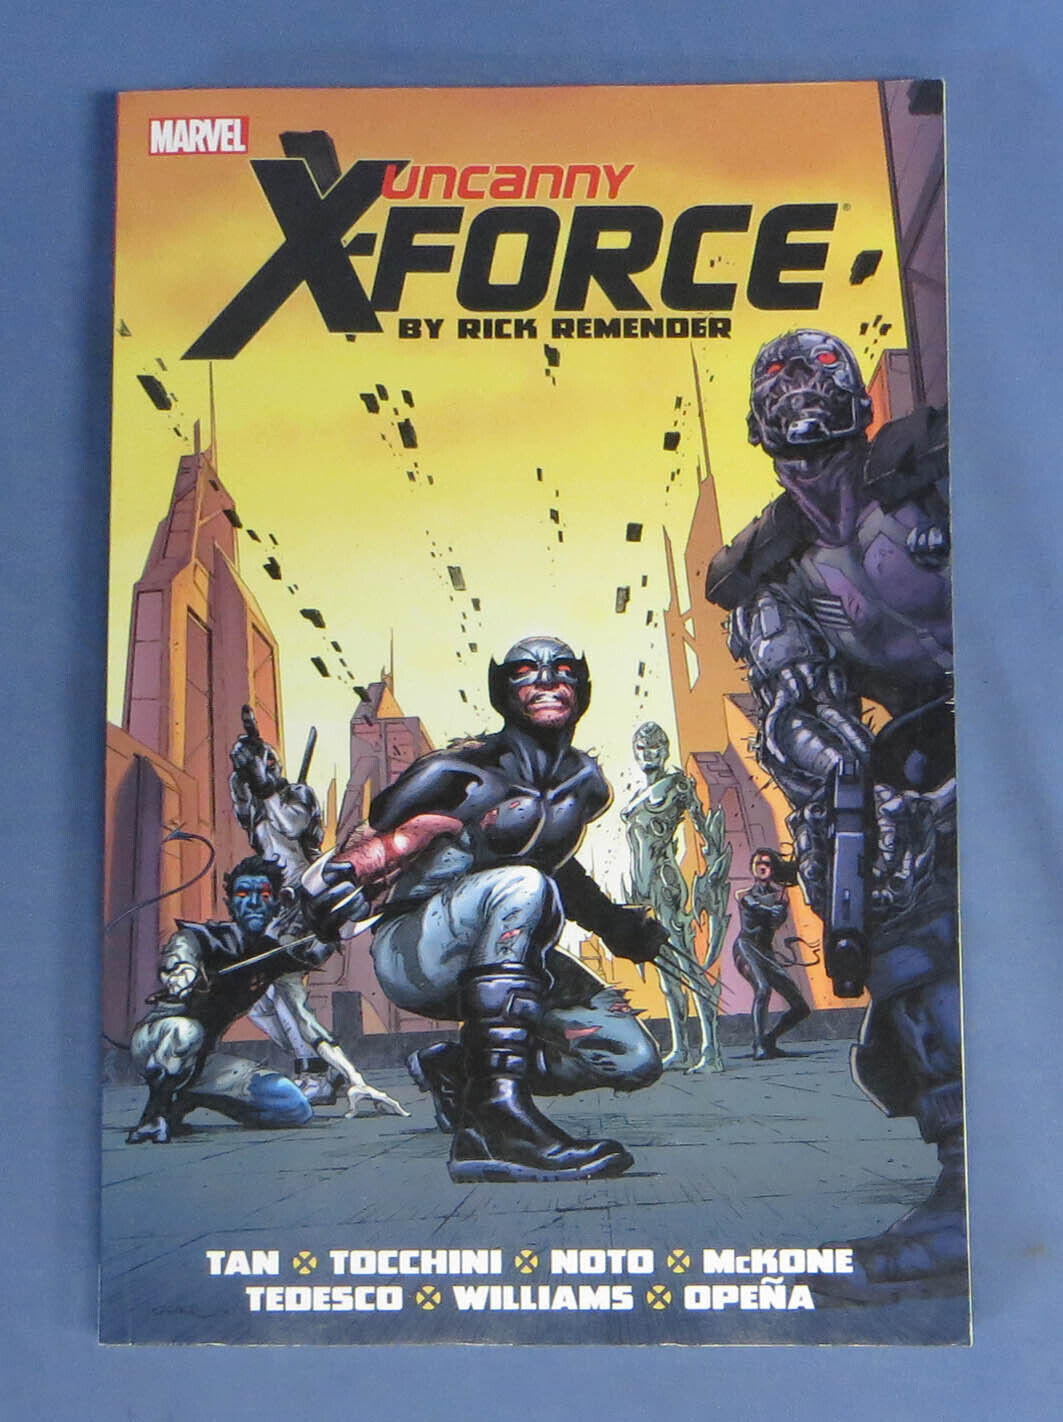 Marvel Uncanny X-Force by Rick Remender: The Complete Collection #2 2016 EXC